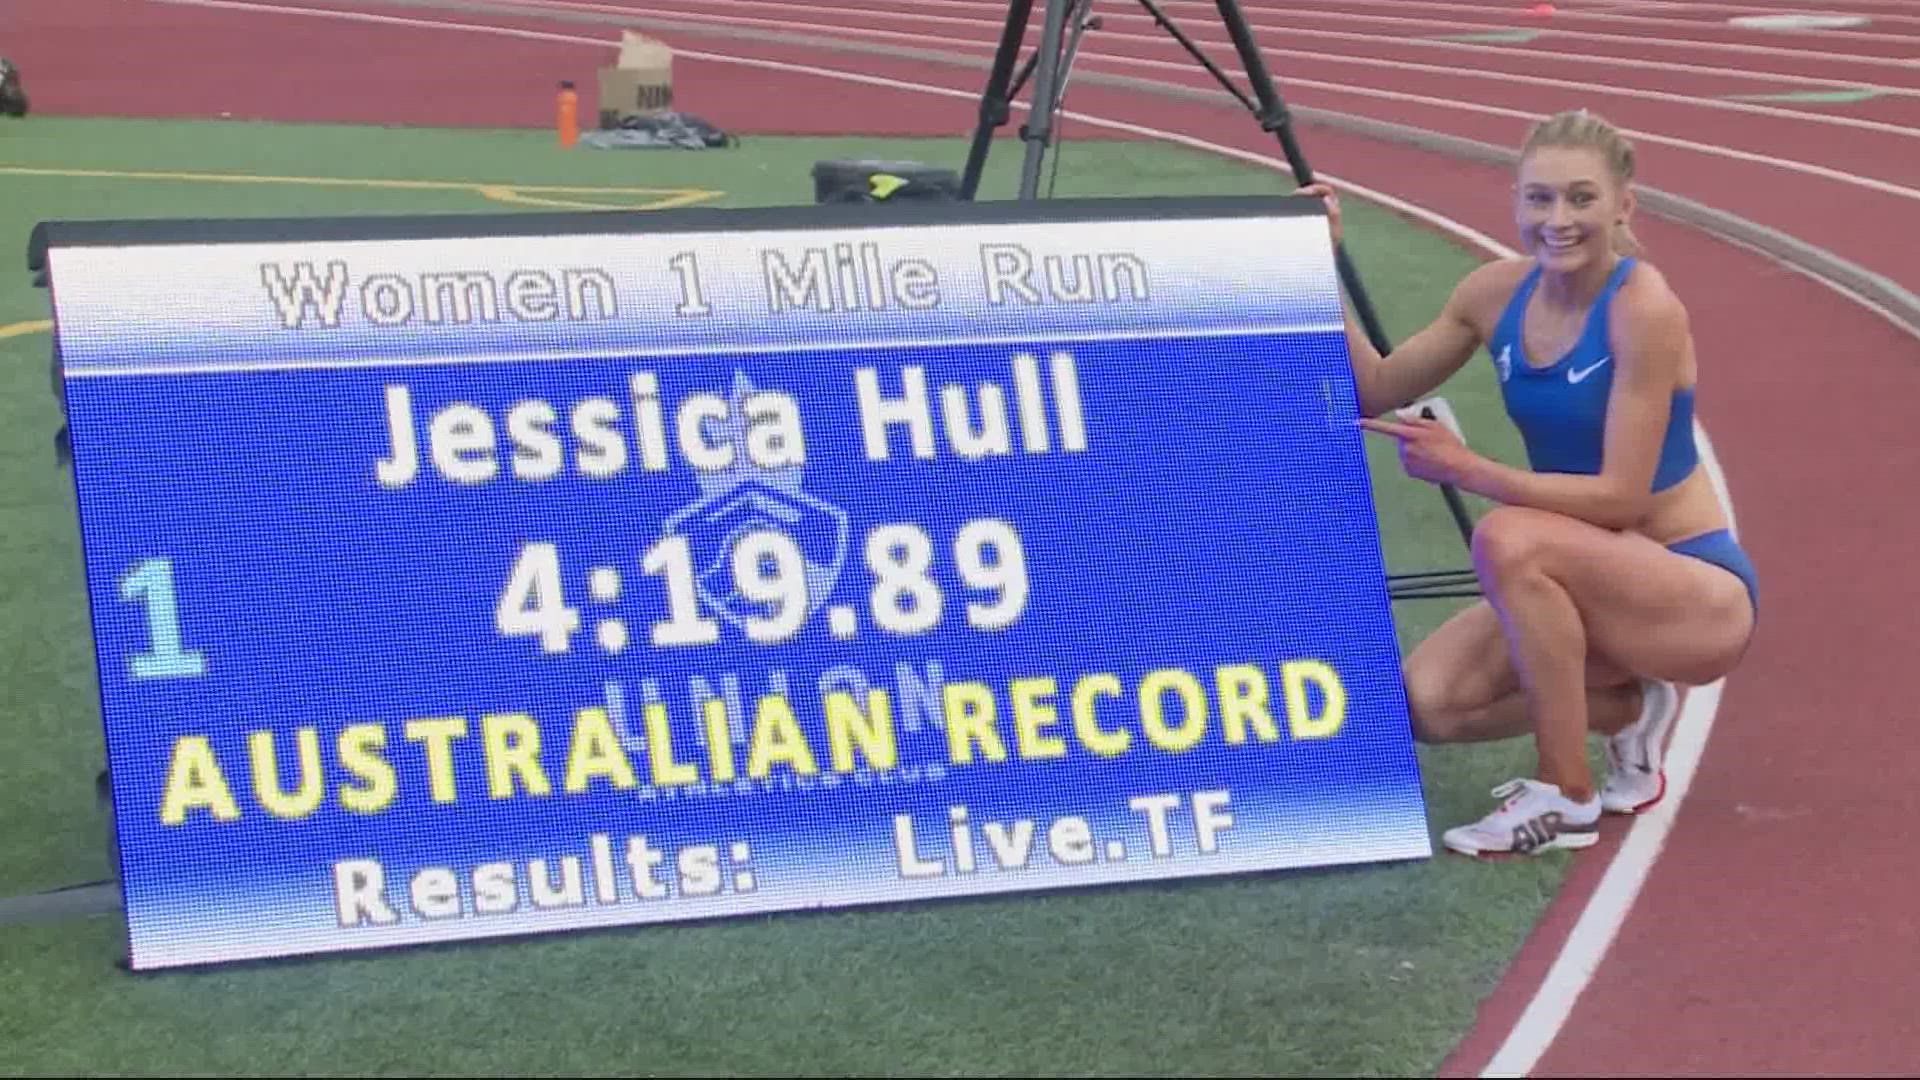 Hull set the Australian women's record in the one-mile race during a meet at Jesuit High School. She now holds seven Australian records.